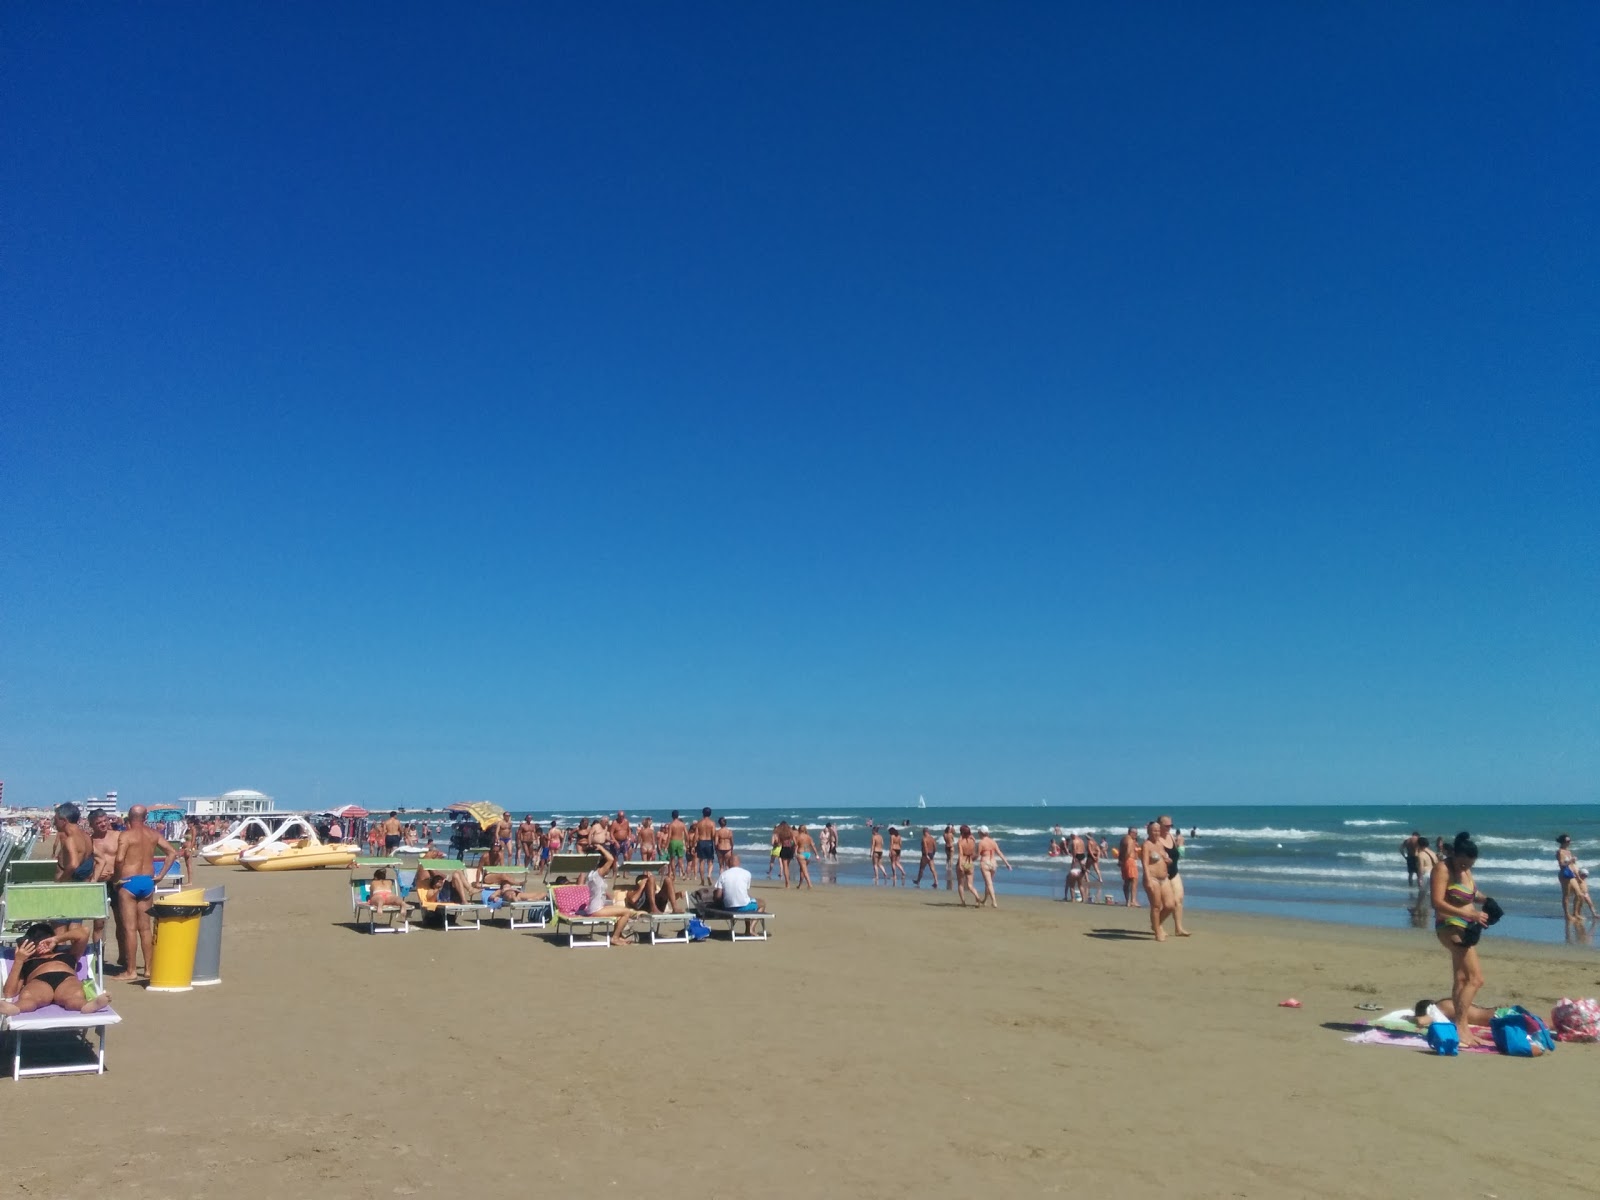 Photo of Spiaggia Senigallia - recommended for family travellers with kids